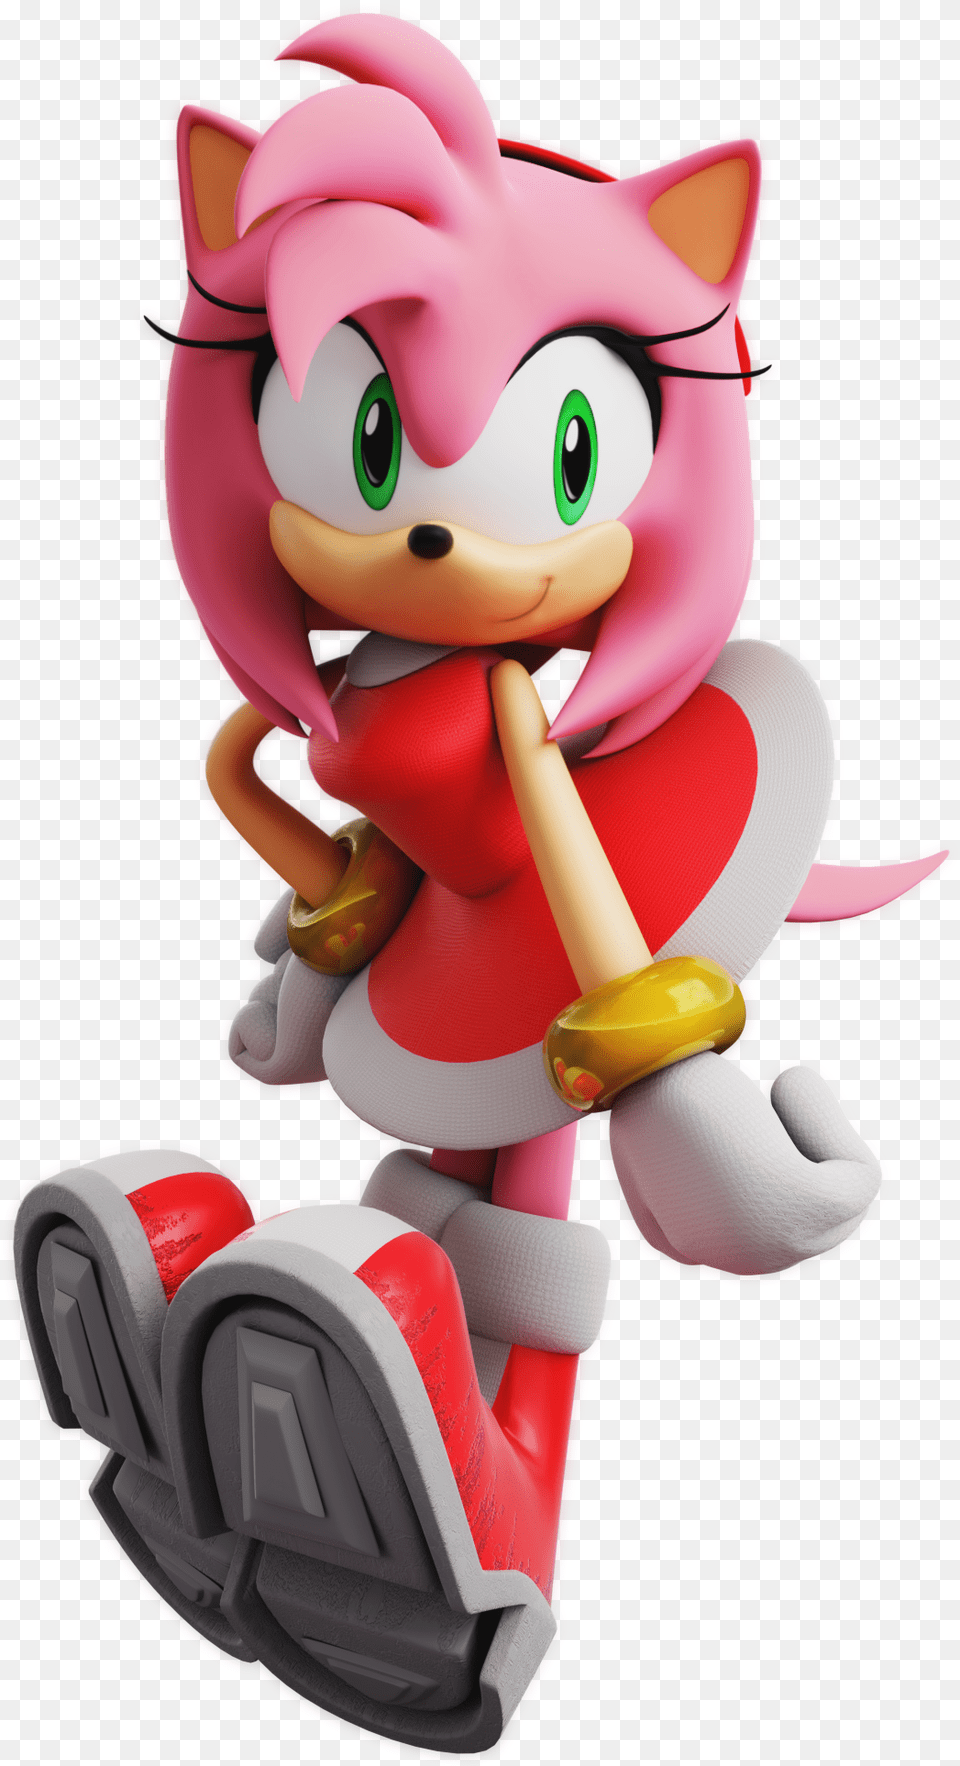 Amy Rose Sonic The Hedgehog Render, Toy, Figurine Png